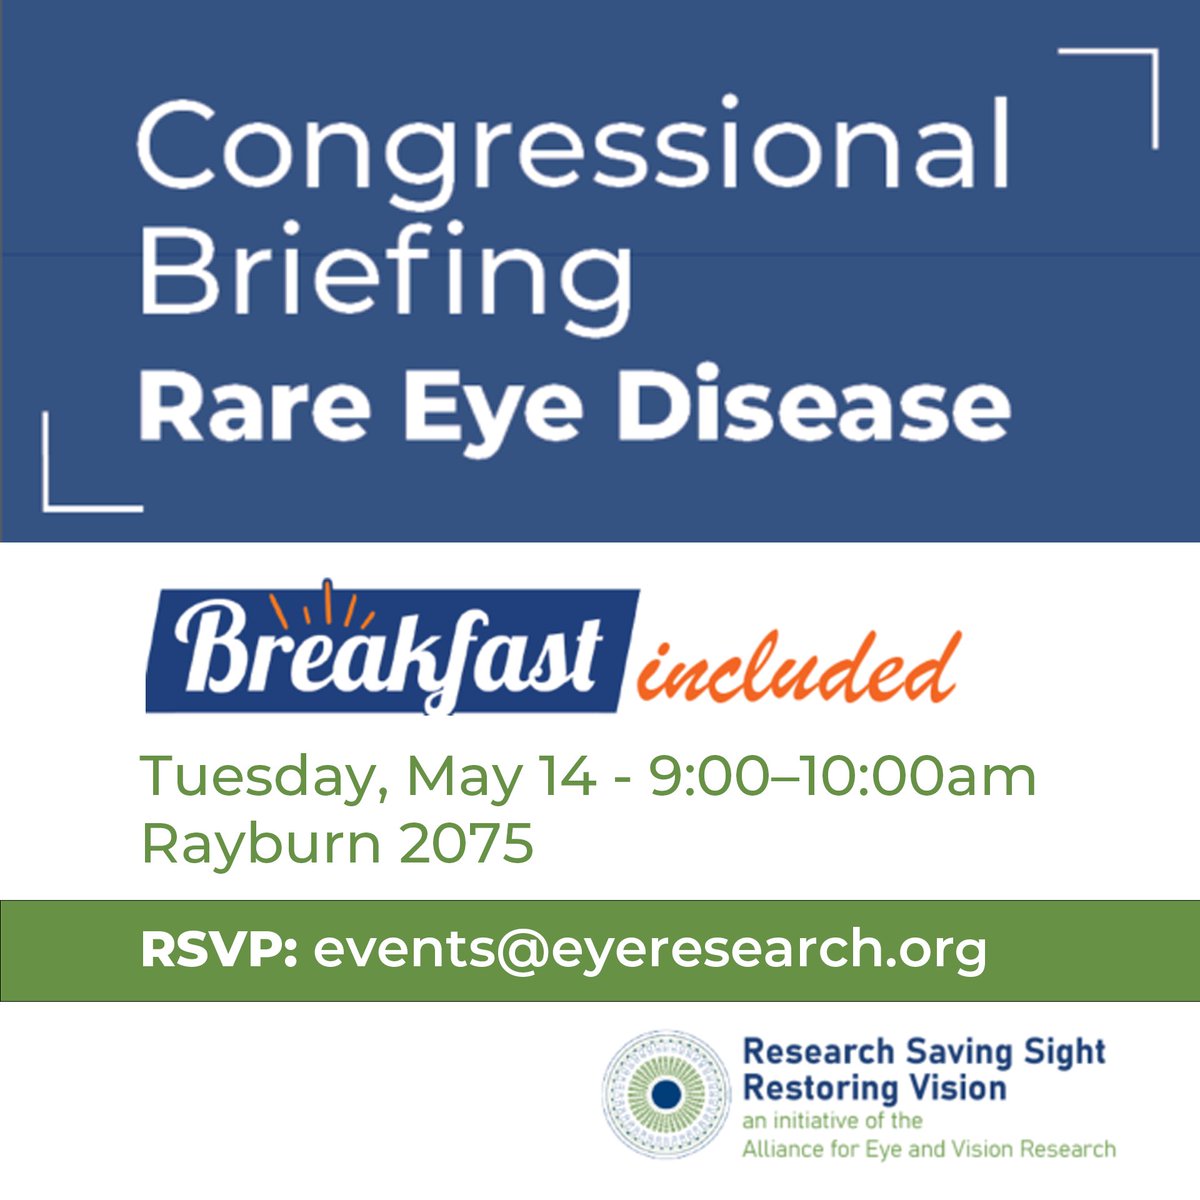 Join us May 14 at 9 AM in Rayburn Building Rm. 2075! We're hosting a Congressional Briefing and Breakfast on Rare Eye Diseases. Patient advocates will share heartfelt stories, while experts from @UMKelloggEye & @alkeuspharma will focus on #Stargardtdisease & #retinitispigmentosa